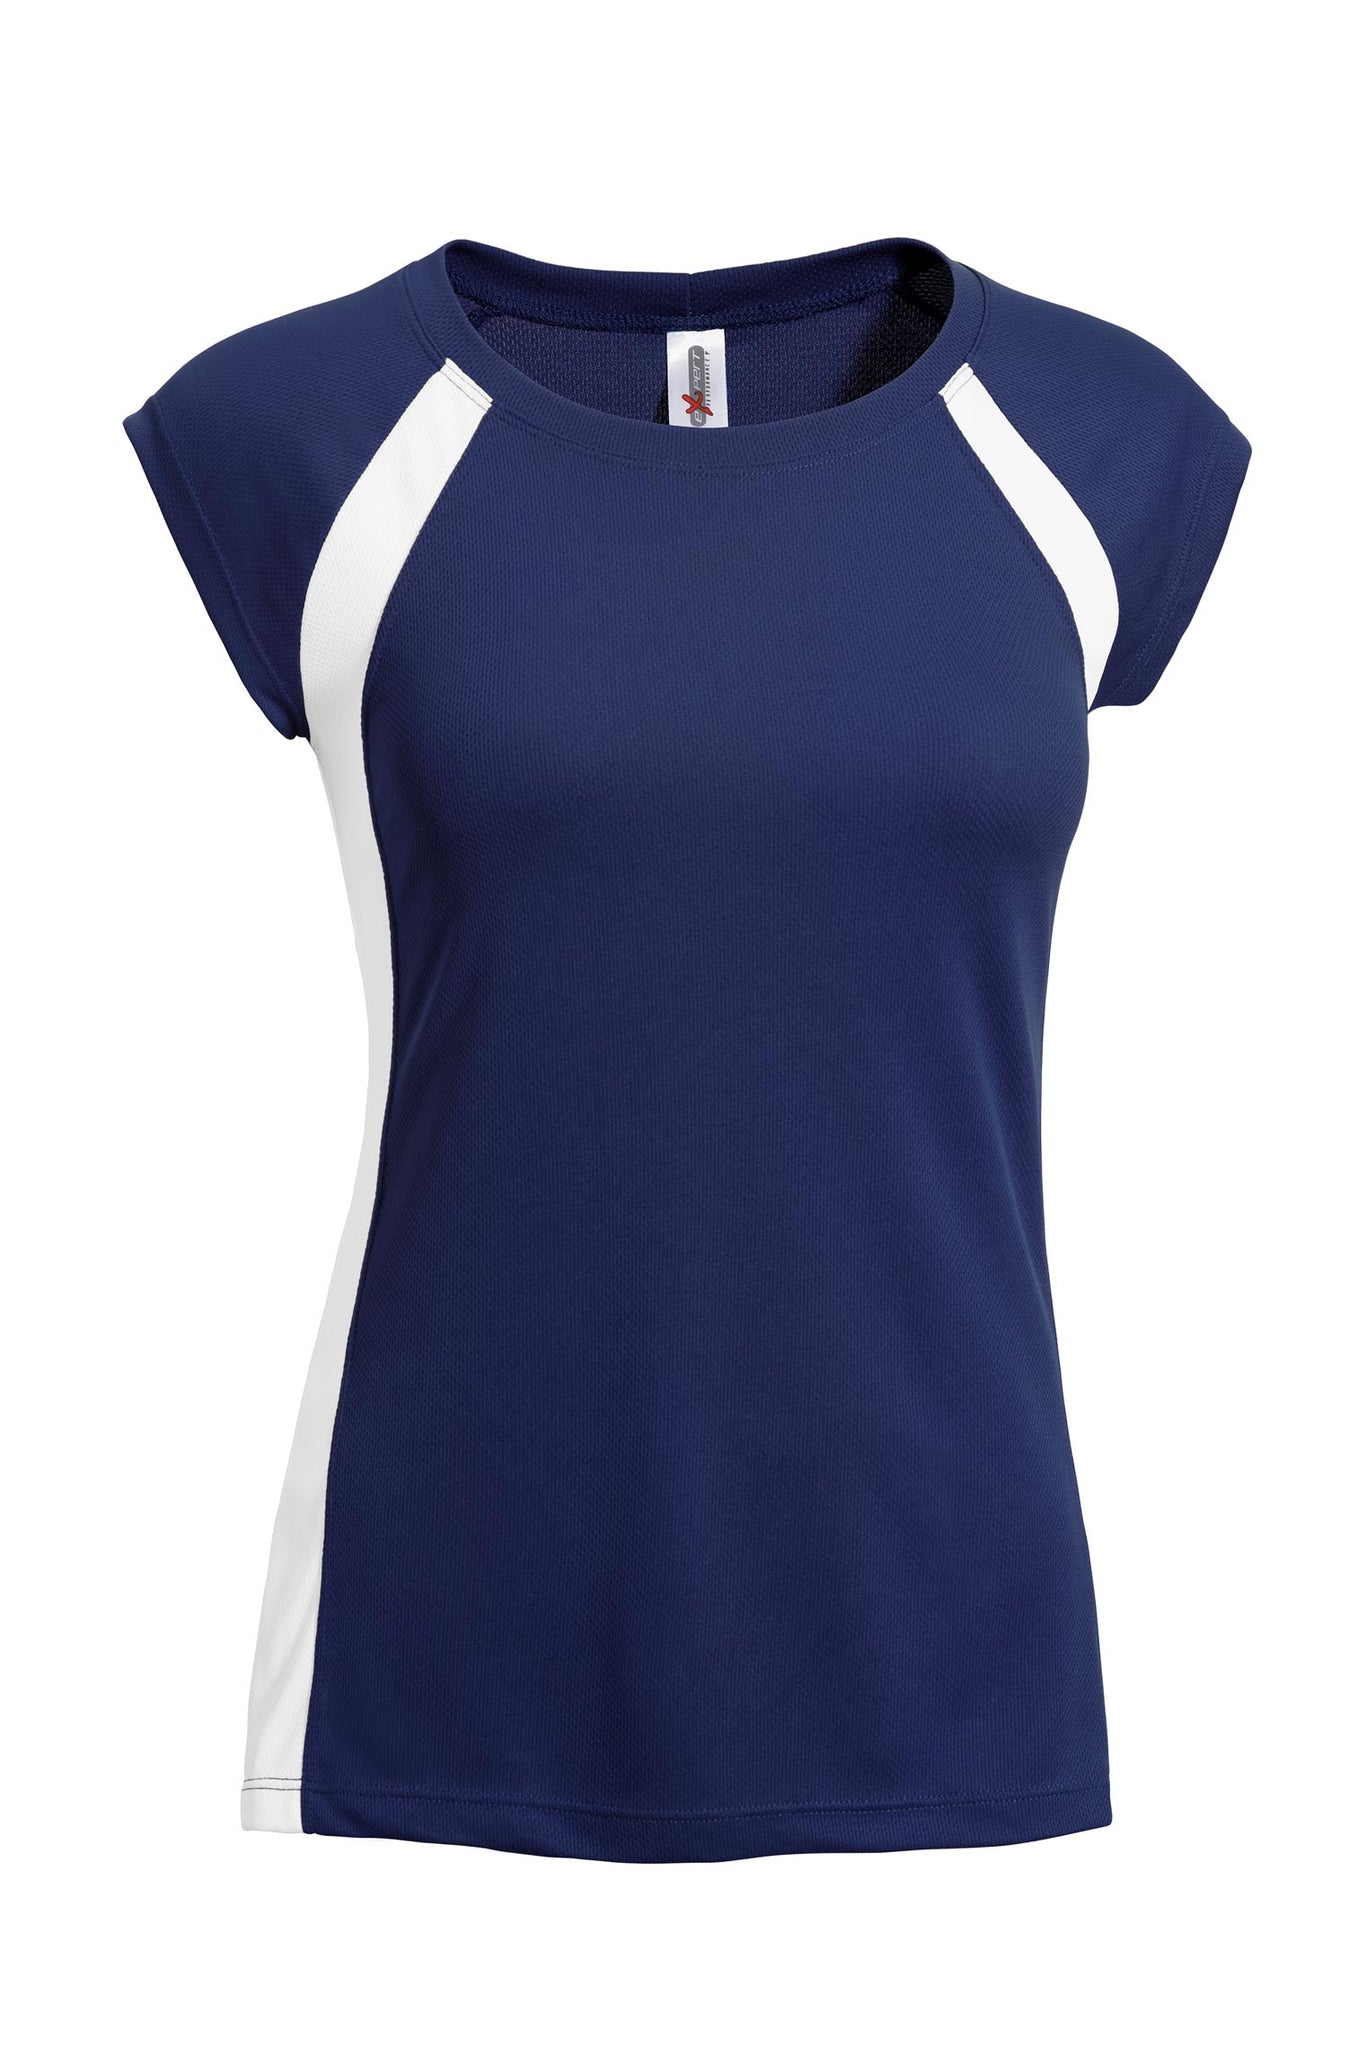 Expert Brand Wholesale Made in USA women's colorblock referee fitness tee in navy#navy